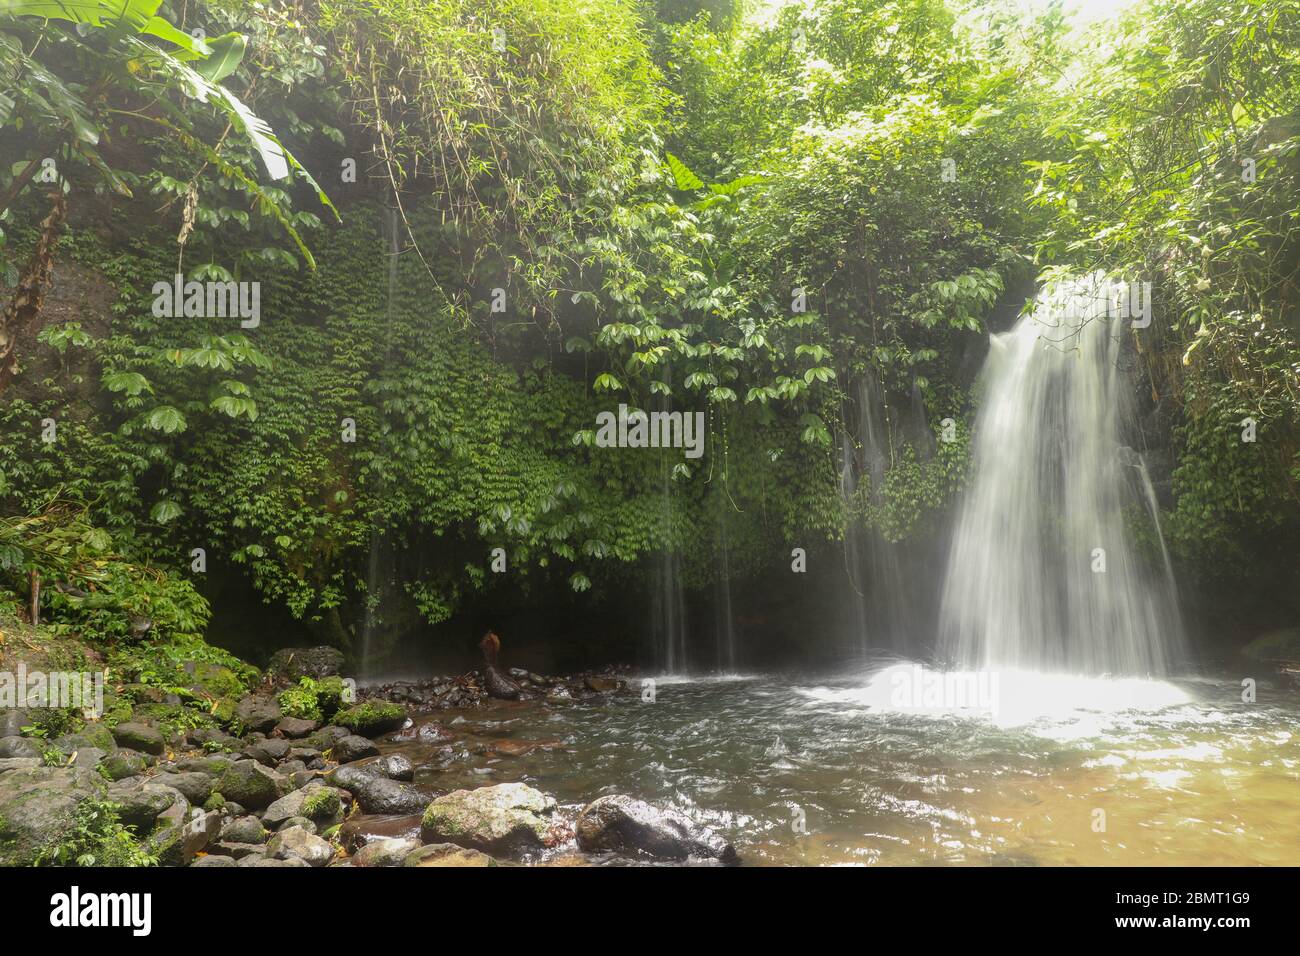 Yeh Ho Waterfall is located in the lush rice field-laden Penebel Stock Photo